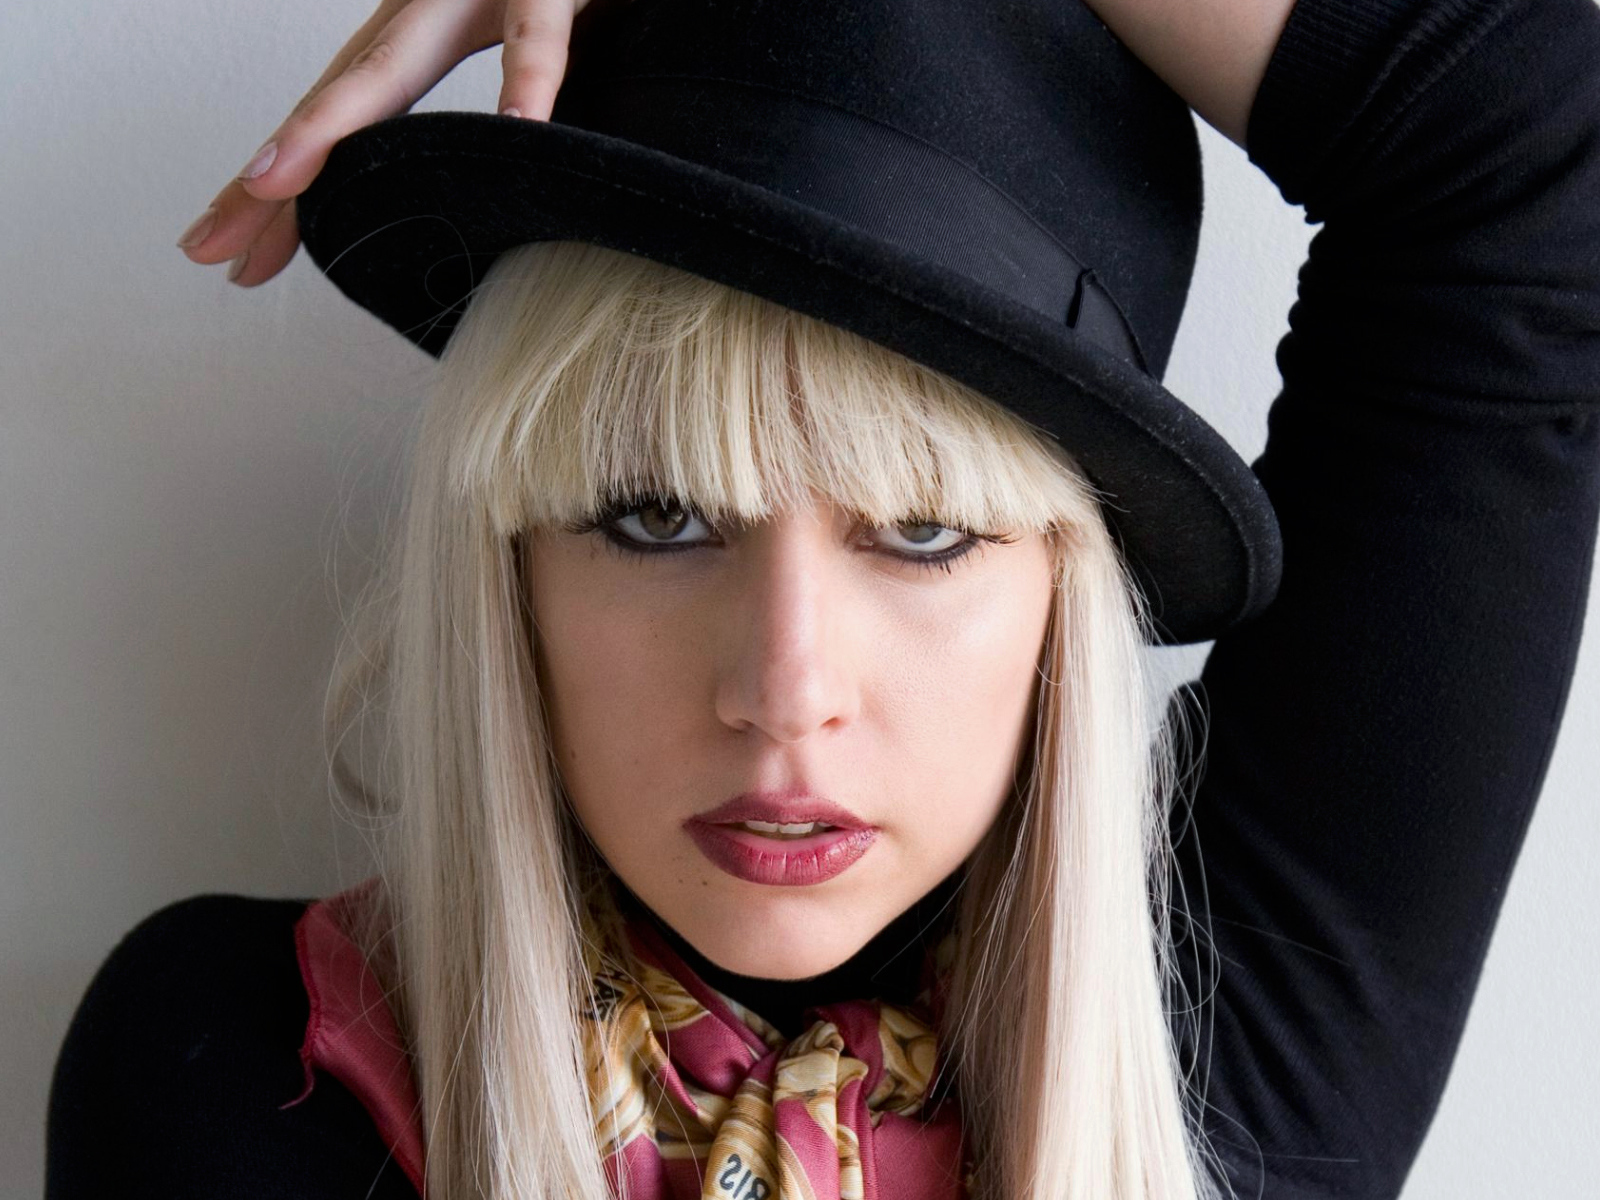 Outrageous singer Lady Gaga wearing a hat